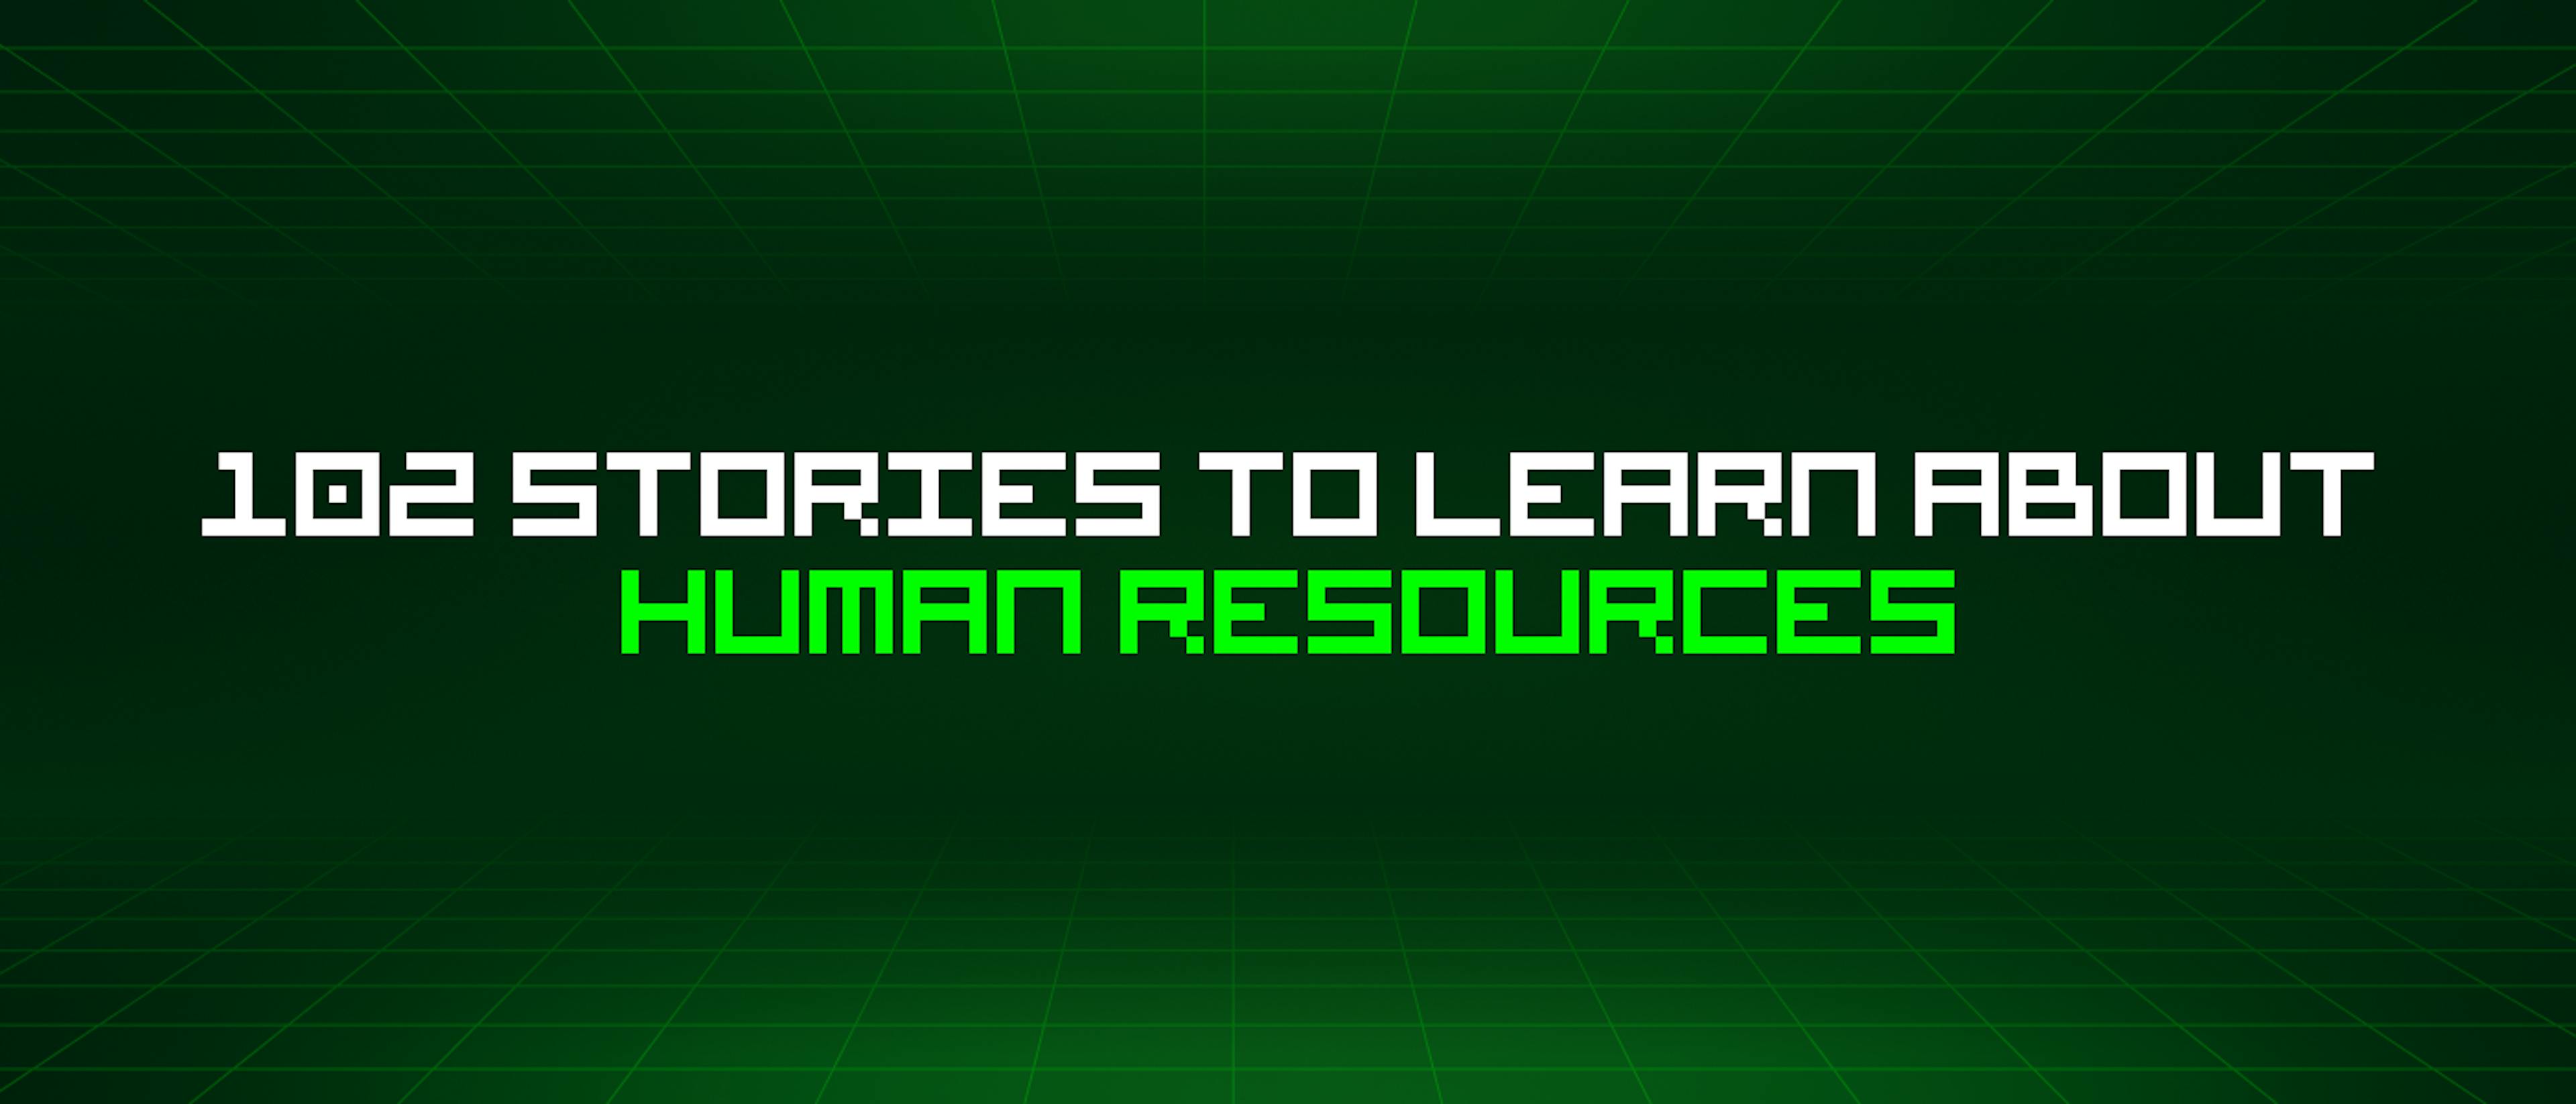 featured image - 102 Stories To Learn About Human Resources